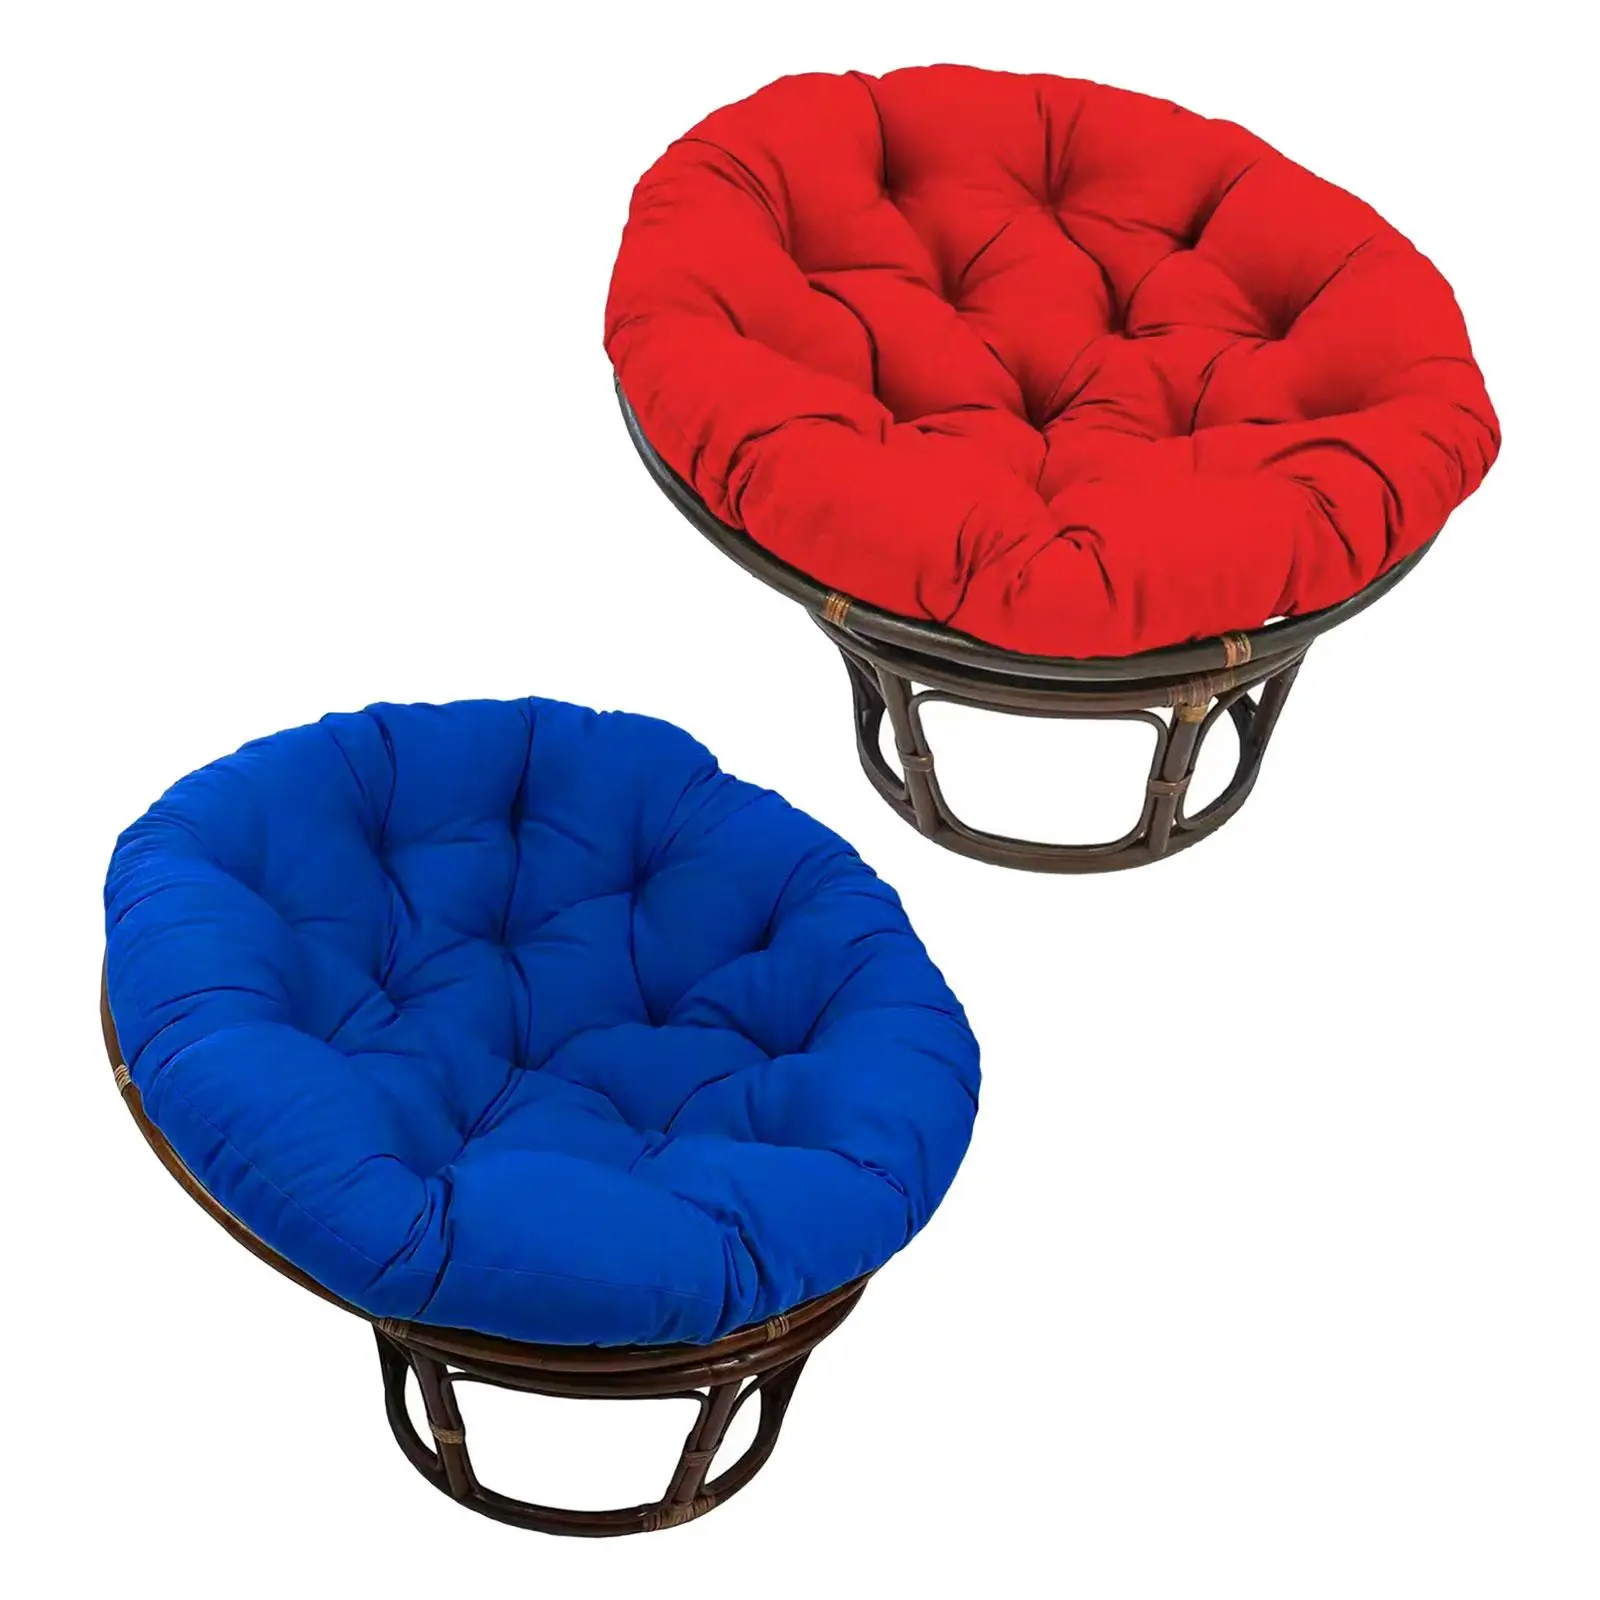 Patio Outdoor Hanging Basket Chair Cushions Egg Swing Chair Cushion for Egg Chair Rocking Chairs Indoor or Outdoor Swing Chairs